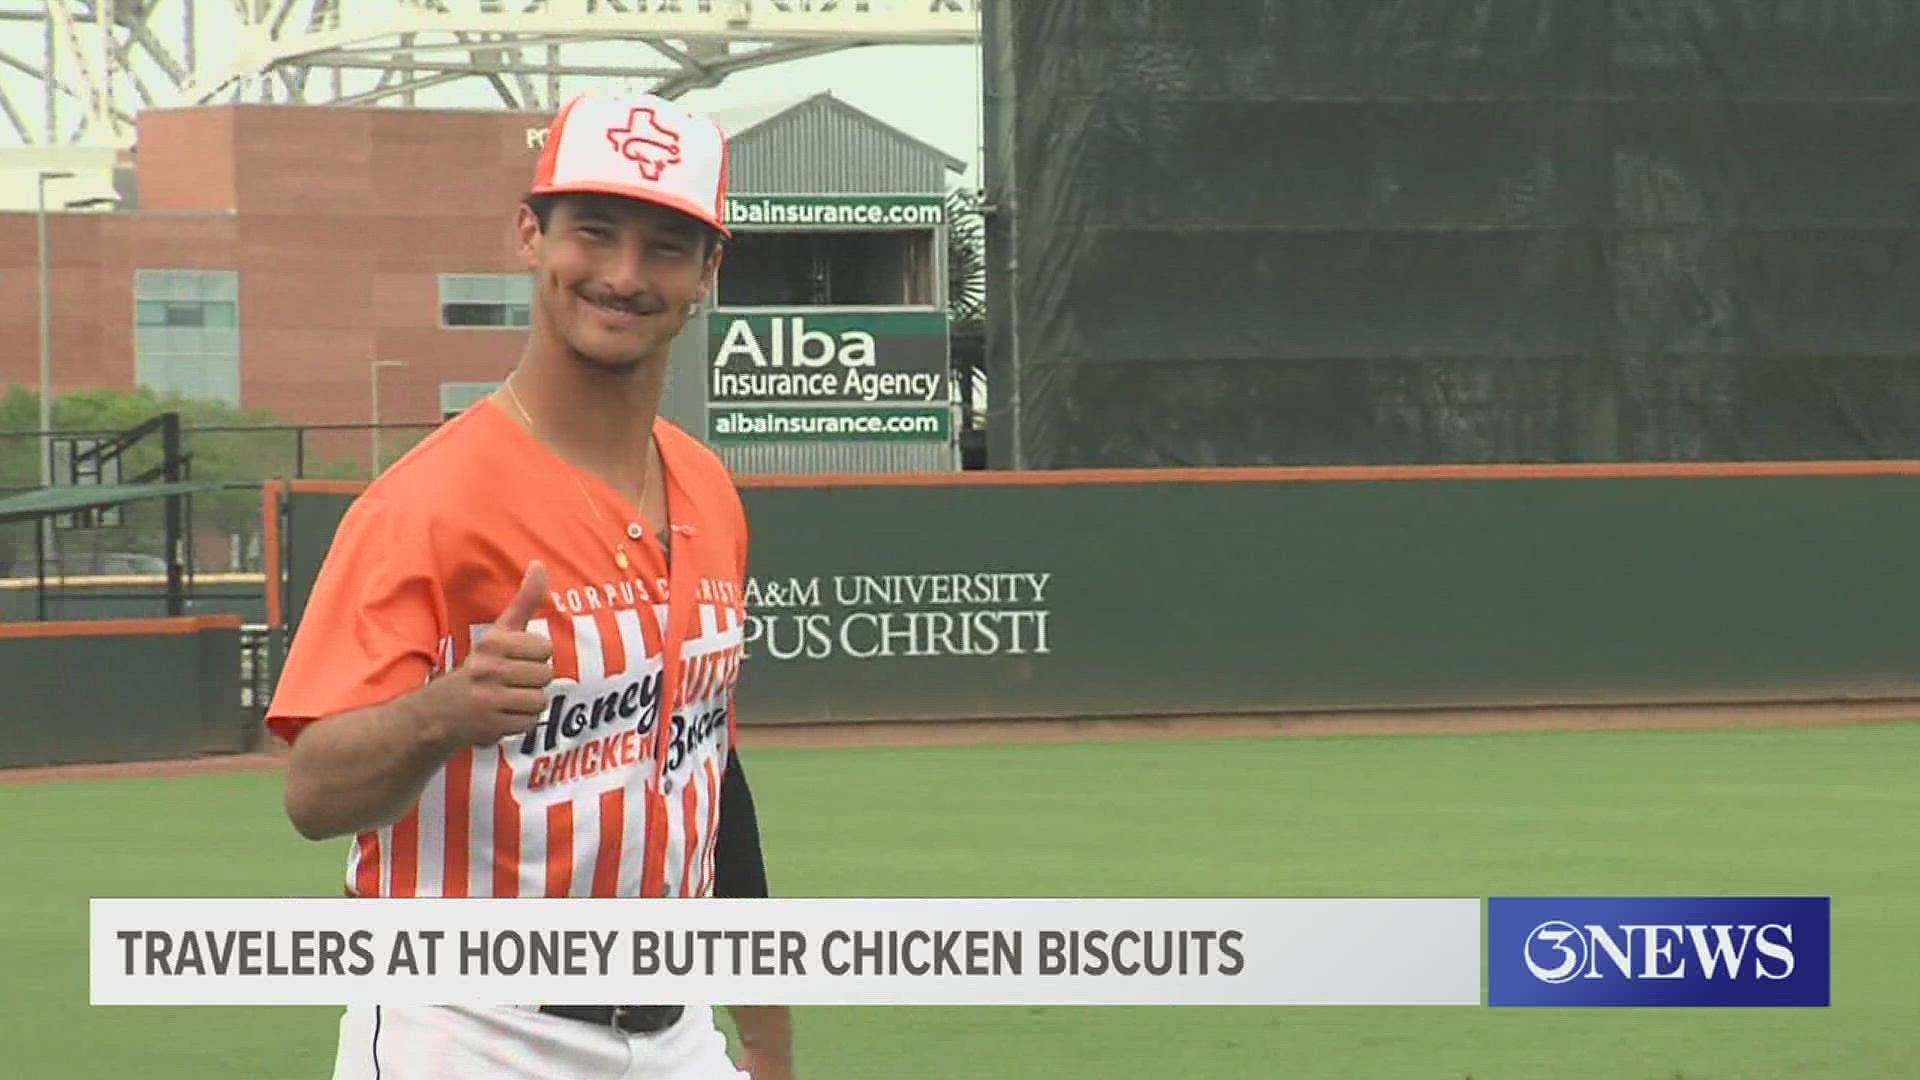 The Hooks finally got some good luck going with the Biscuits making their 2022 Whataburger Field debut Wednesday.